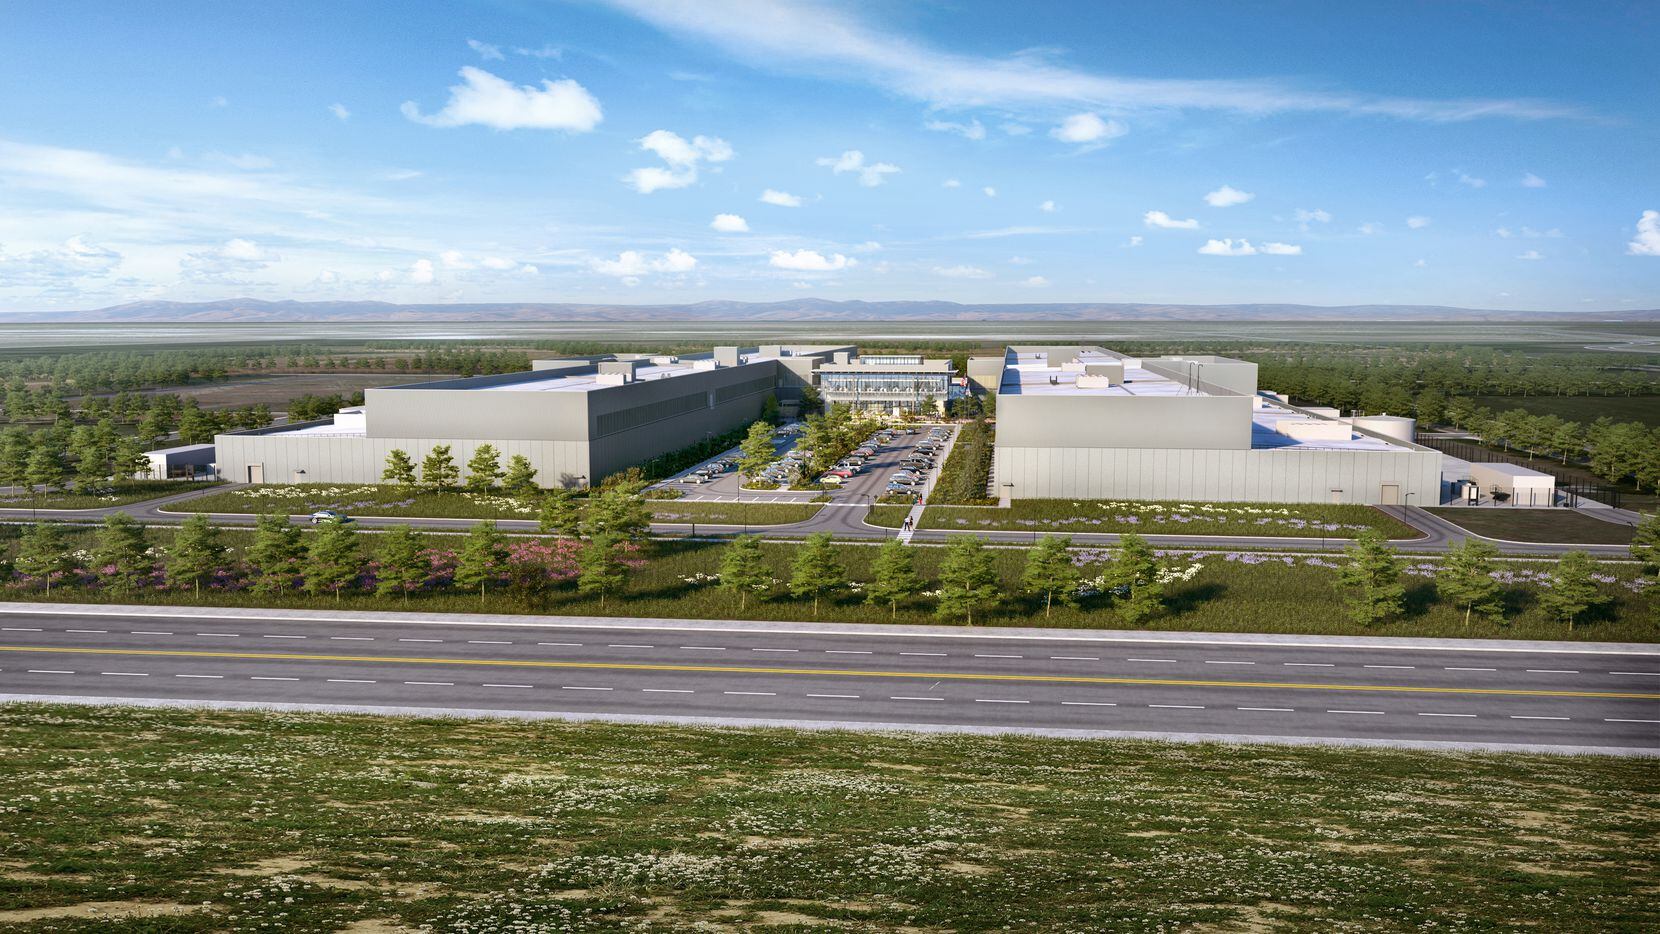 Meta is building a new data center in Temple, TX.  The center will bring 100 jobs to the area.